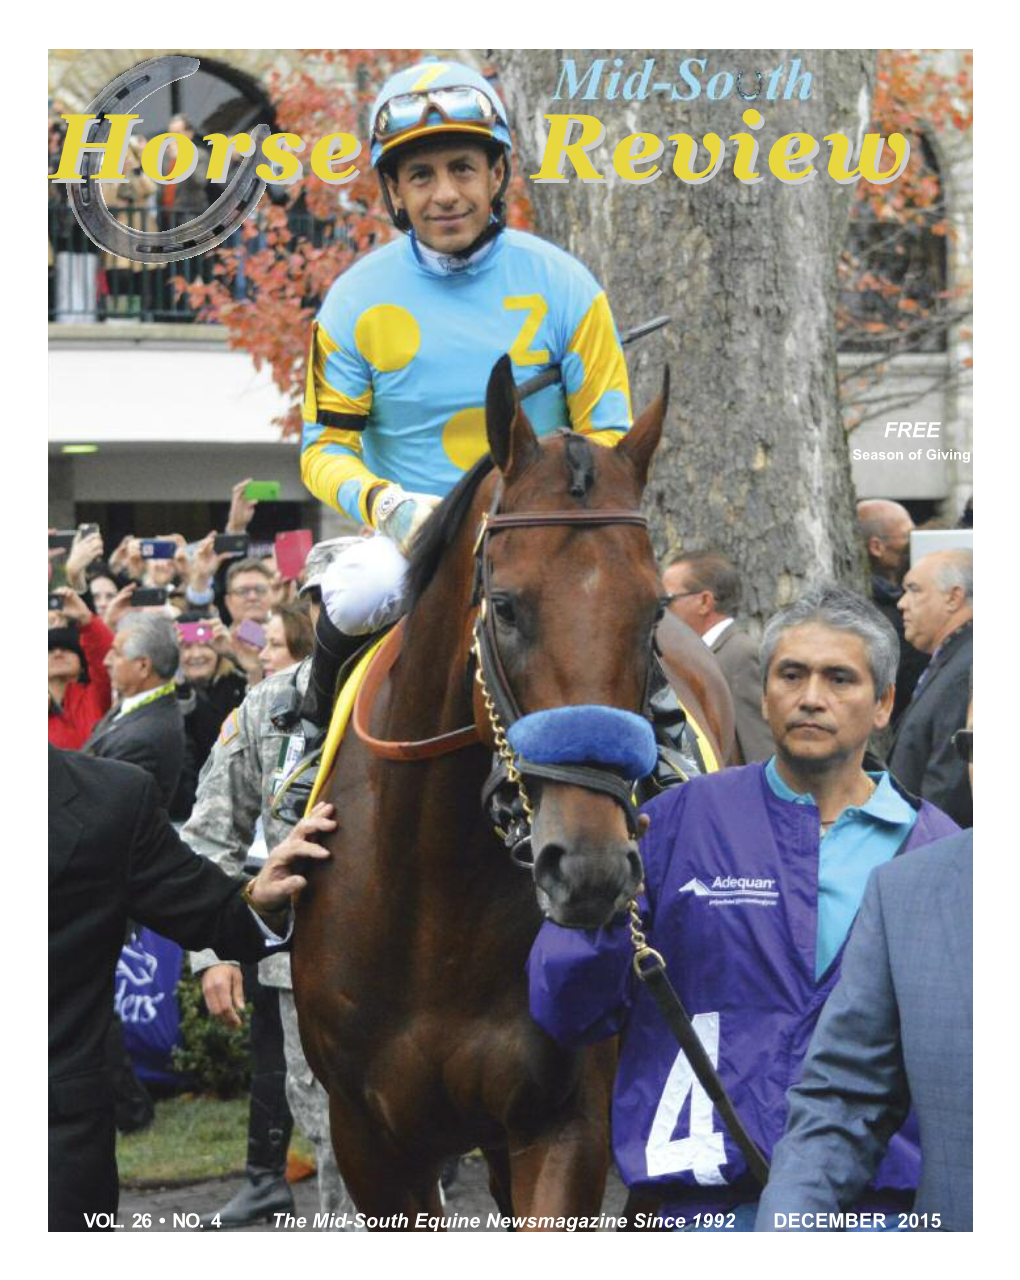 VOL. 26 • NO. 4 the Mid-South Equine Newsmagazine Since 1992 DECEMBER 2015 2